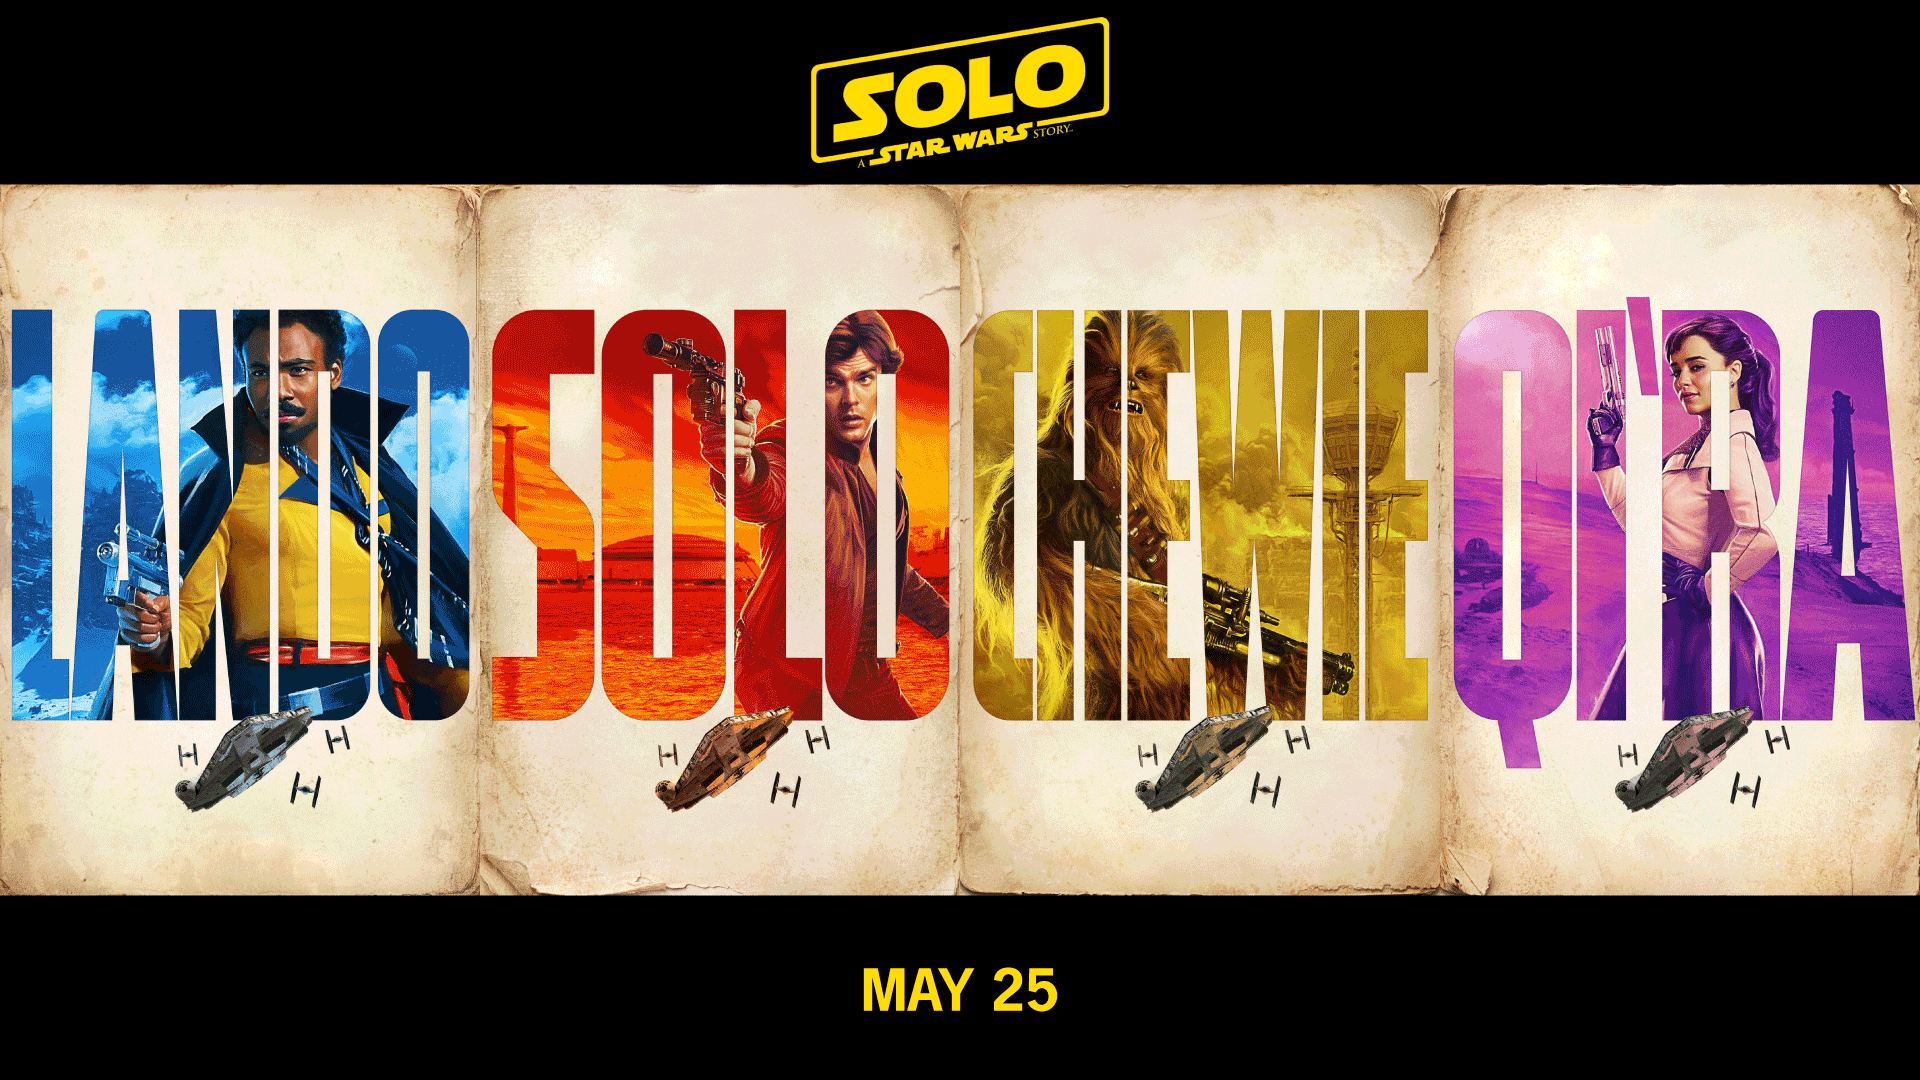 New character poster for Solo A Star Wars Story! StarWars